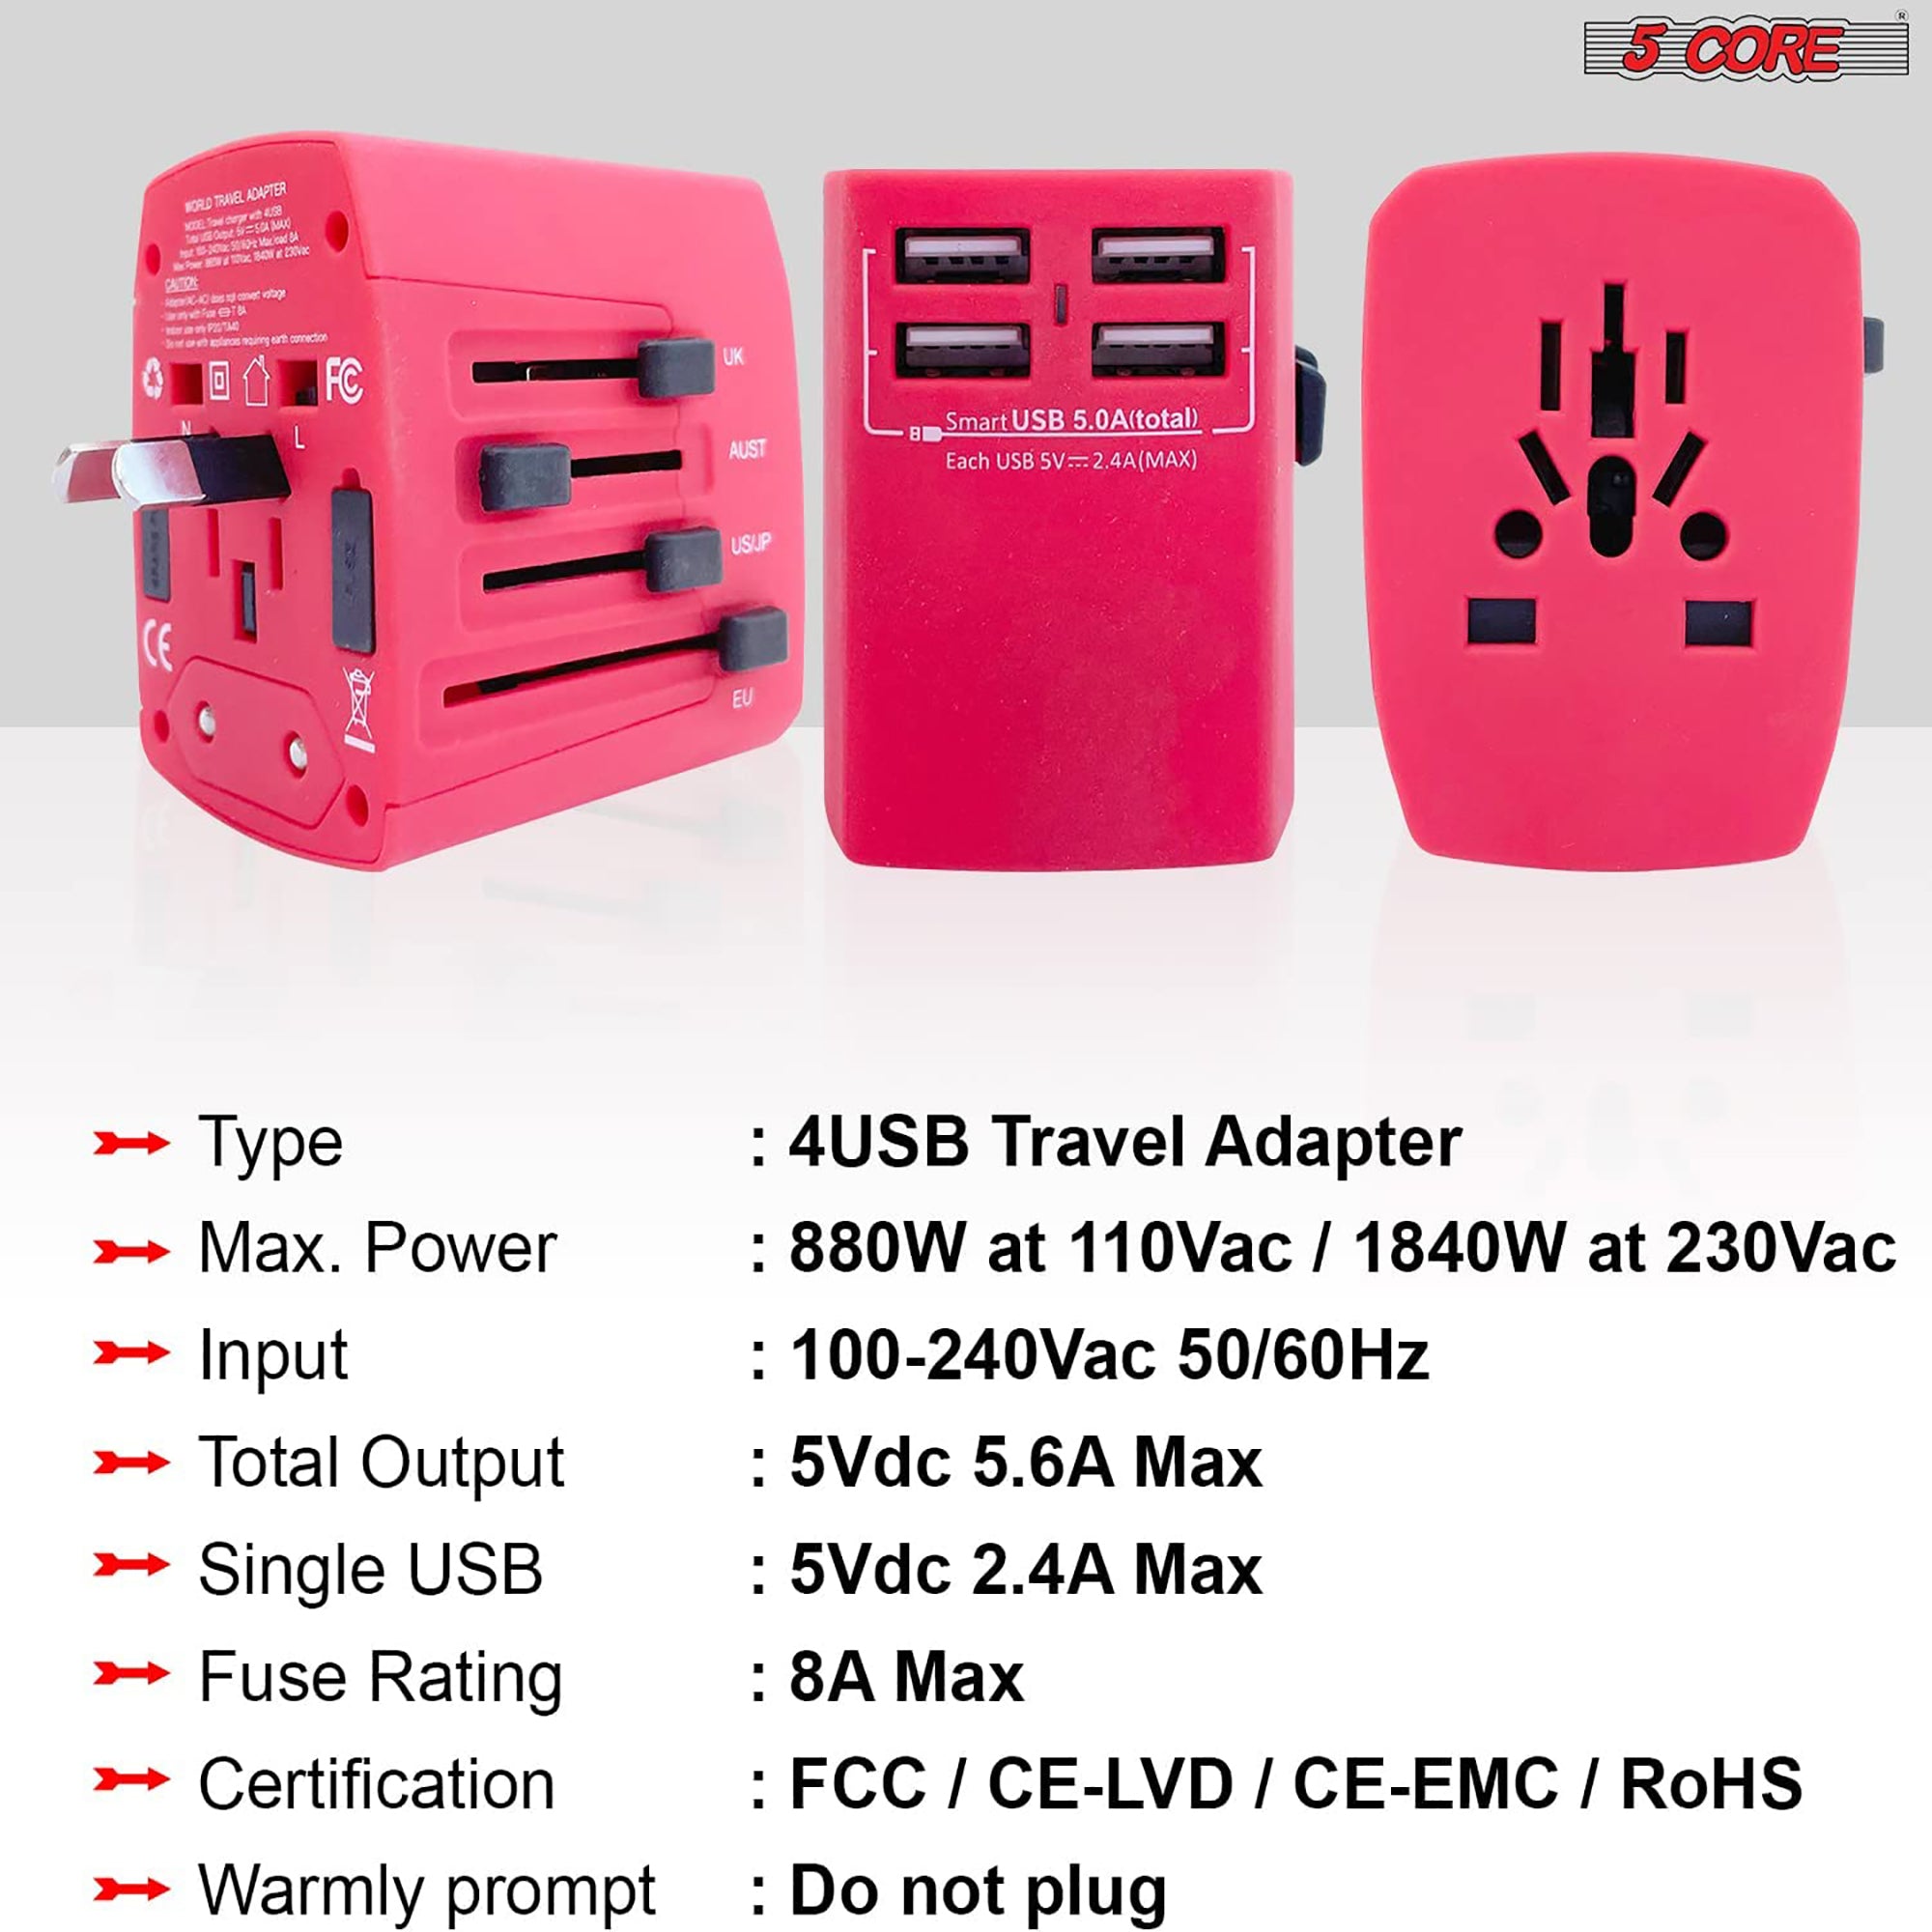 5 Core Travel Adapter 1 Piece Red International Power Adapter Plug Multi Outlet Port 4 USB Travel Charger Universal AC Plug Outlet Adapter- UTA R